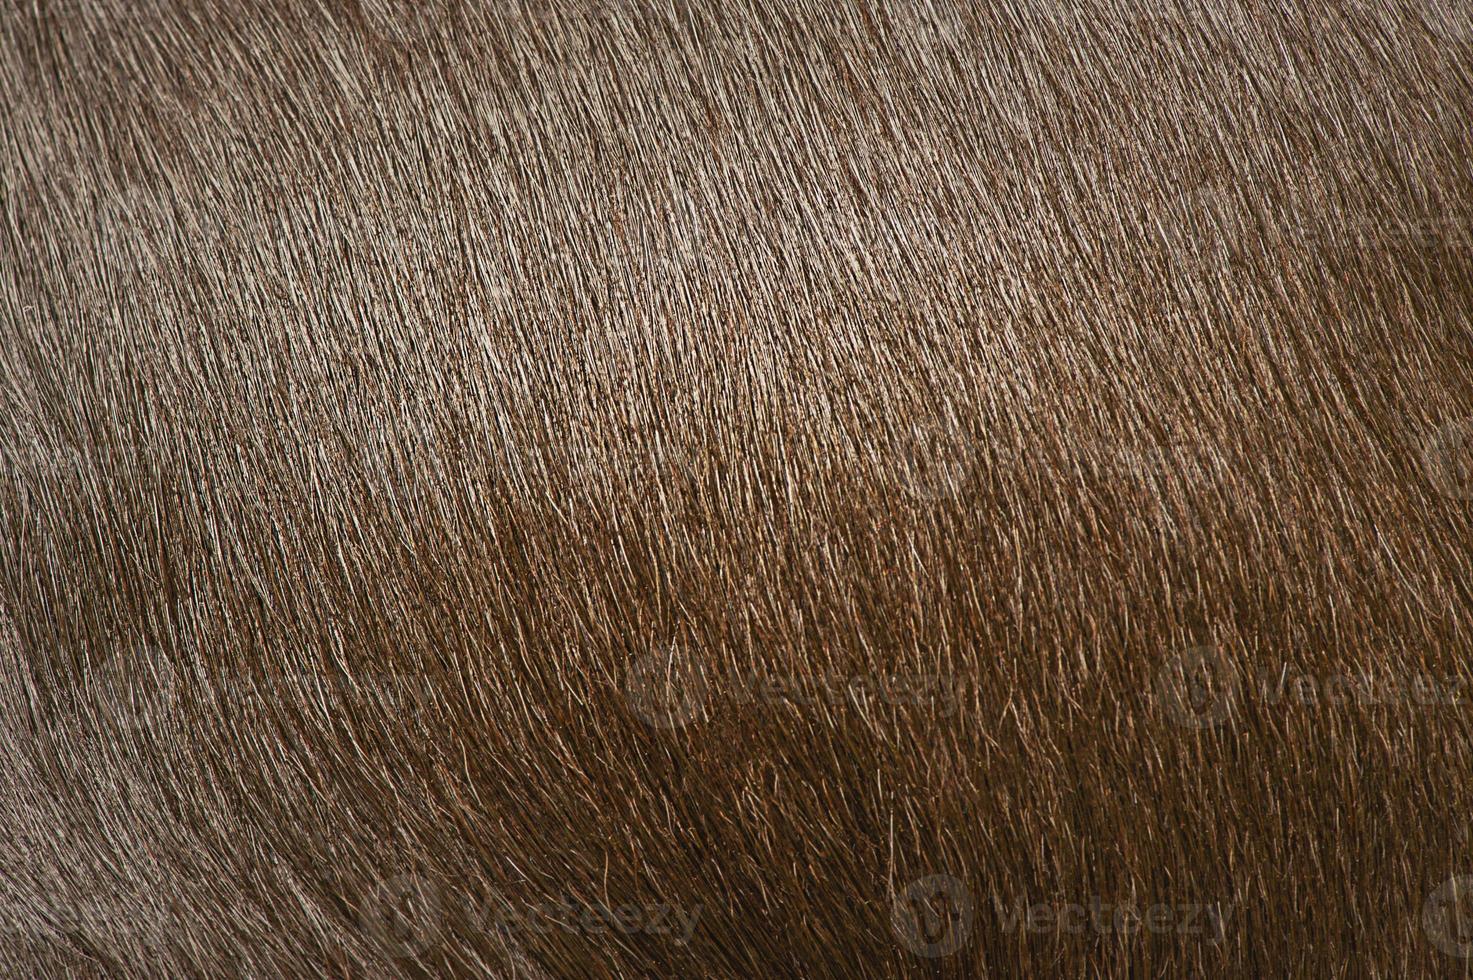 The fur of the dog is black as a macro background. Shiny Chihuahua fur. photo